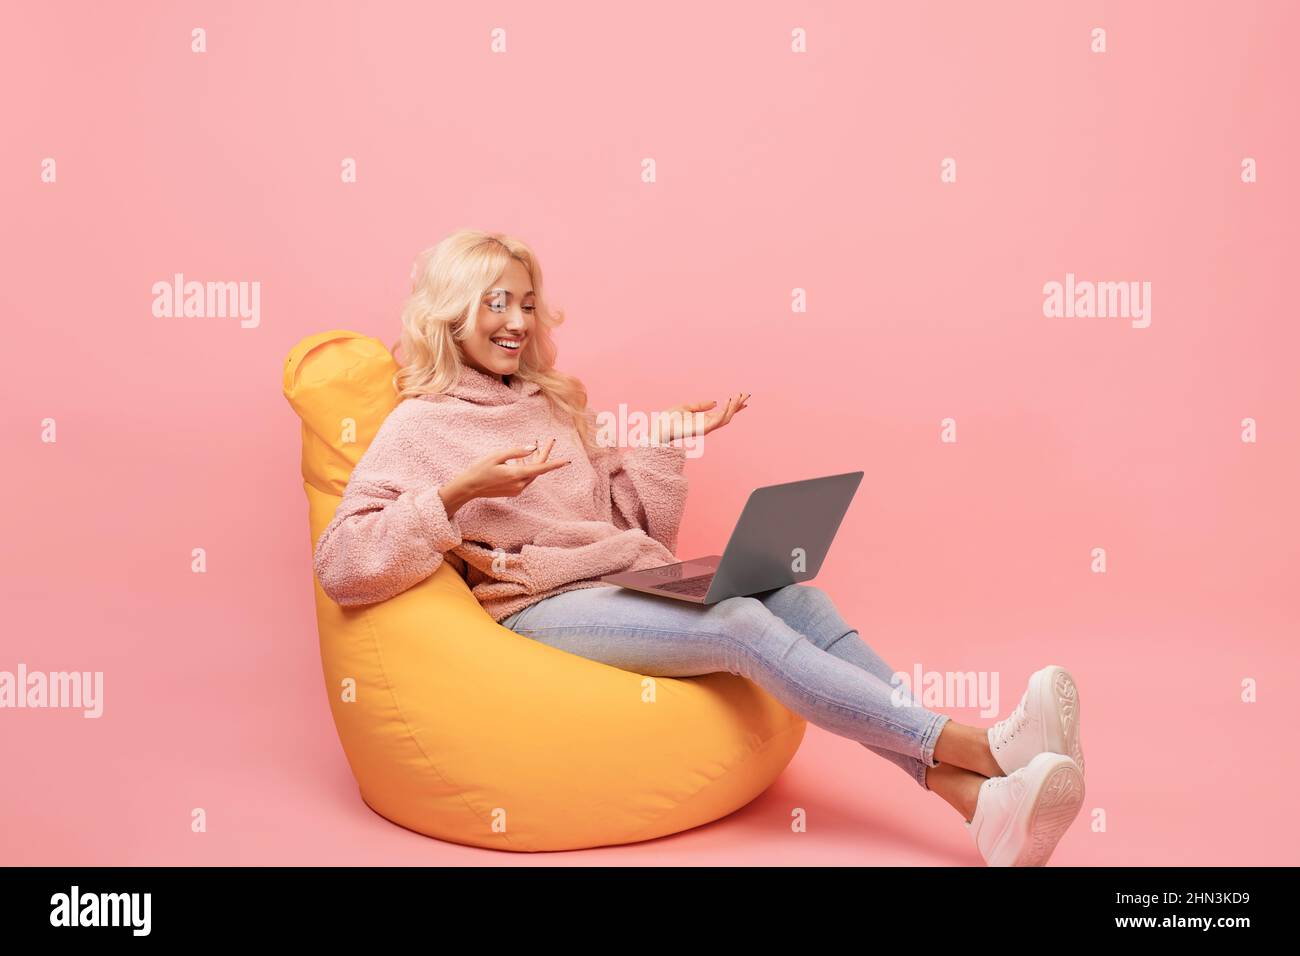 https://c8.alamy.com/comp/2HN3KD9/happy-woman-making-video-call-on-laptop-while-sitting-in-beanbag-chair-emotionally-talking-at-computer-screen-2HN3KD9.jpg